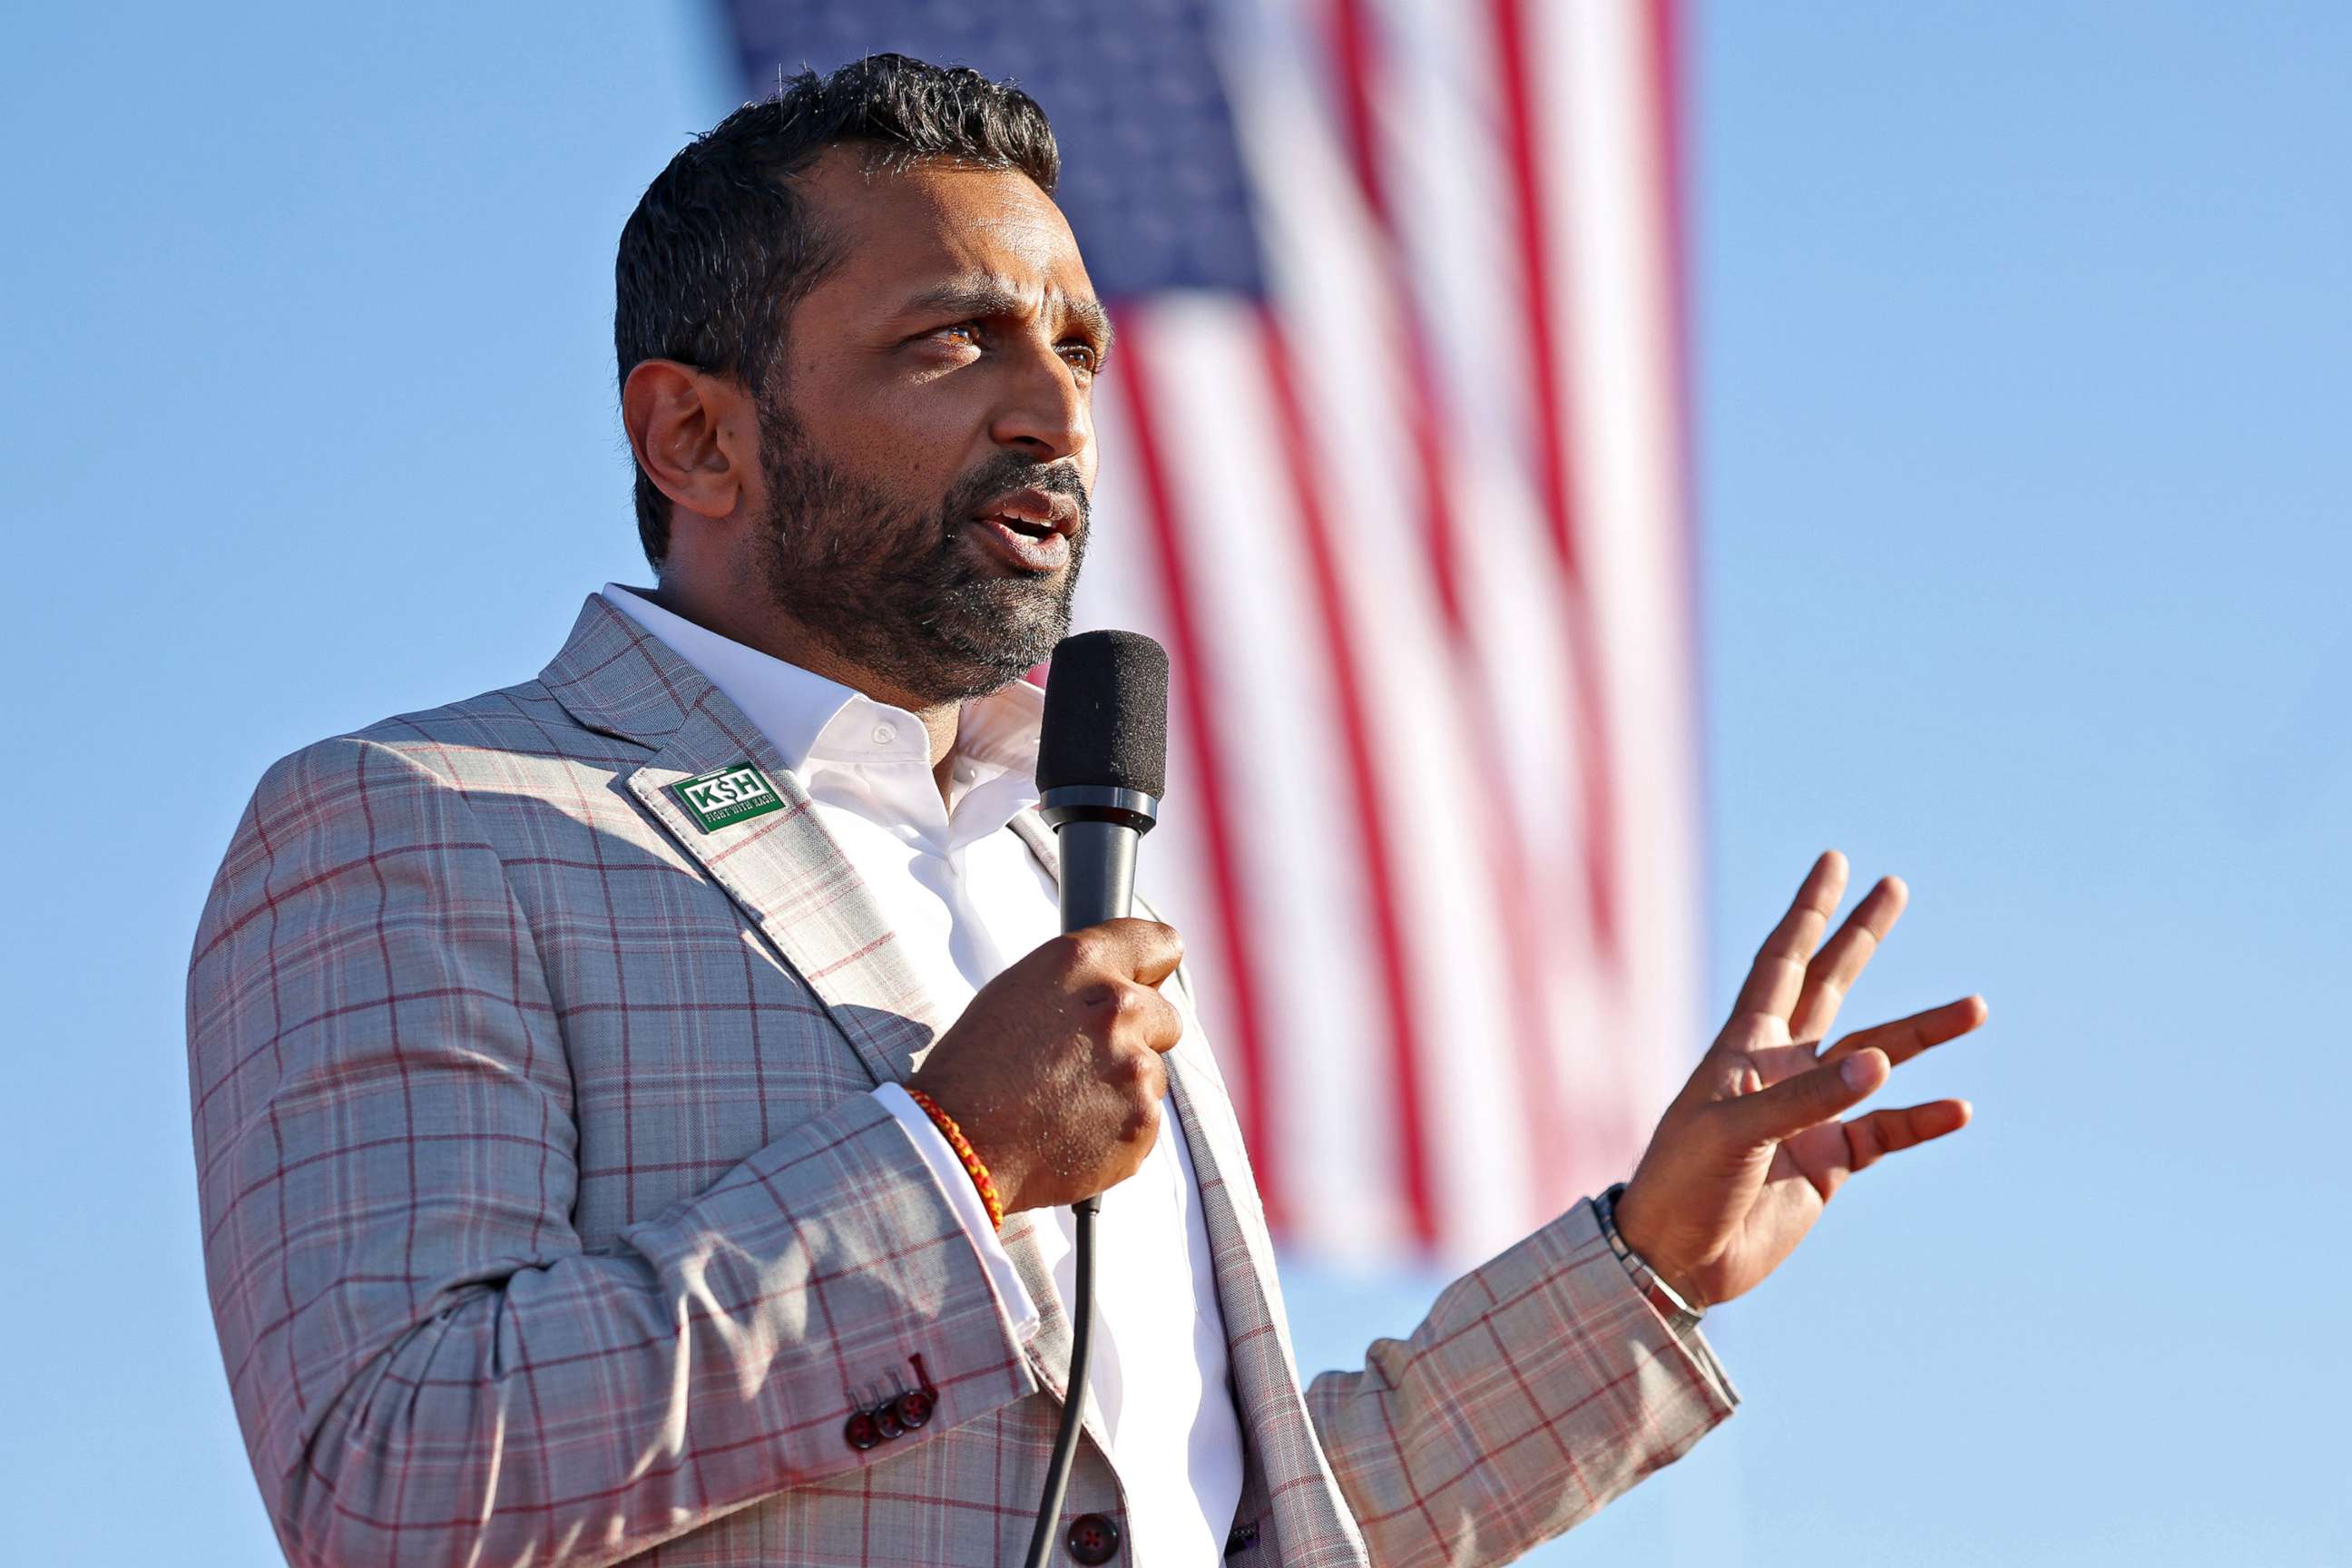 PHOTO: Former Chief of Staff to the Department of Defense Kash Patel speaks during a campaign rally at Minden-Tahoe Airport on Oct. 8, 2022 in Minden, Nevada. ty Images)